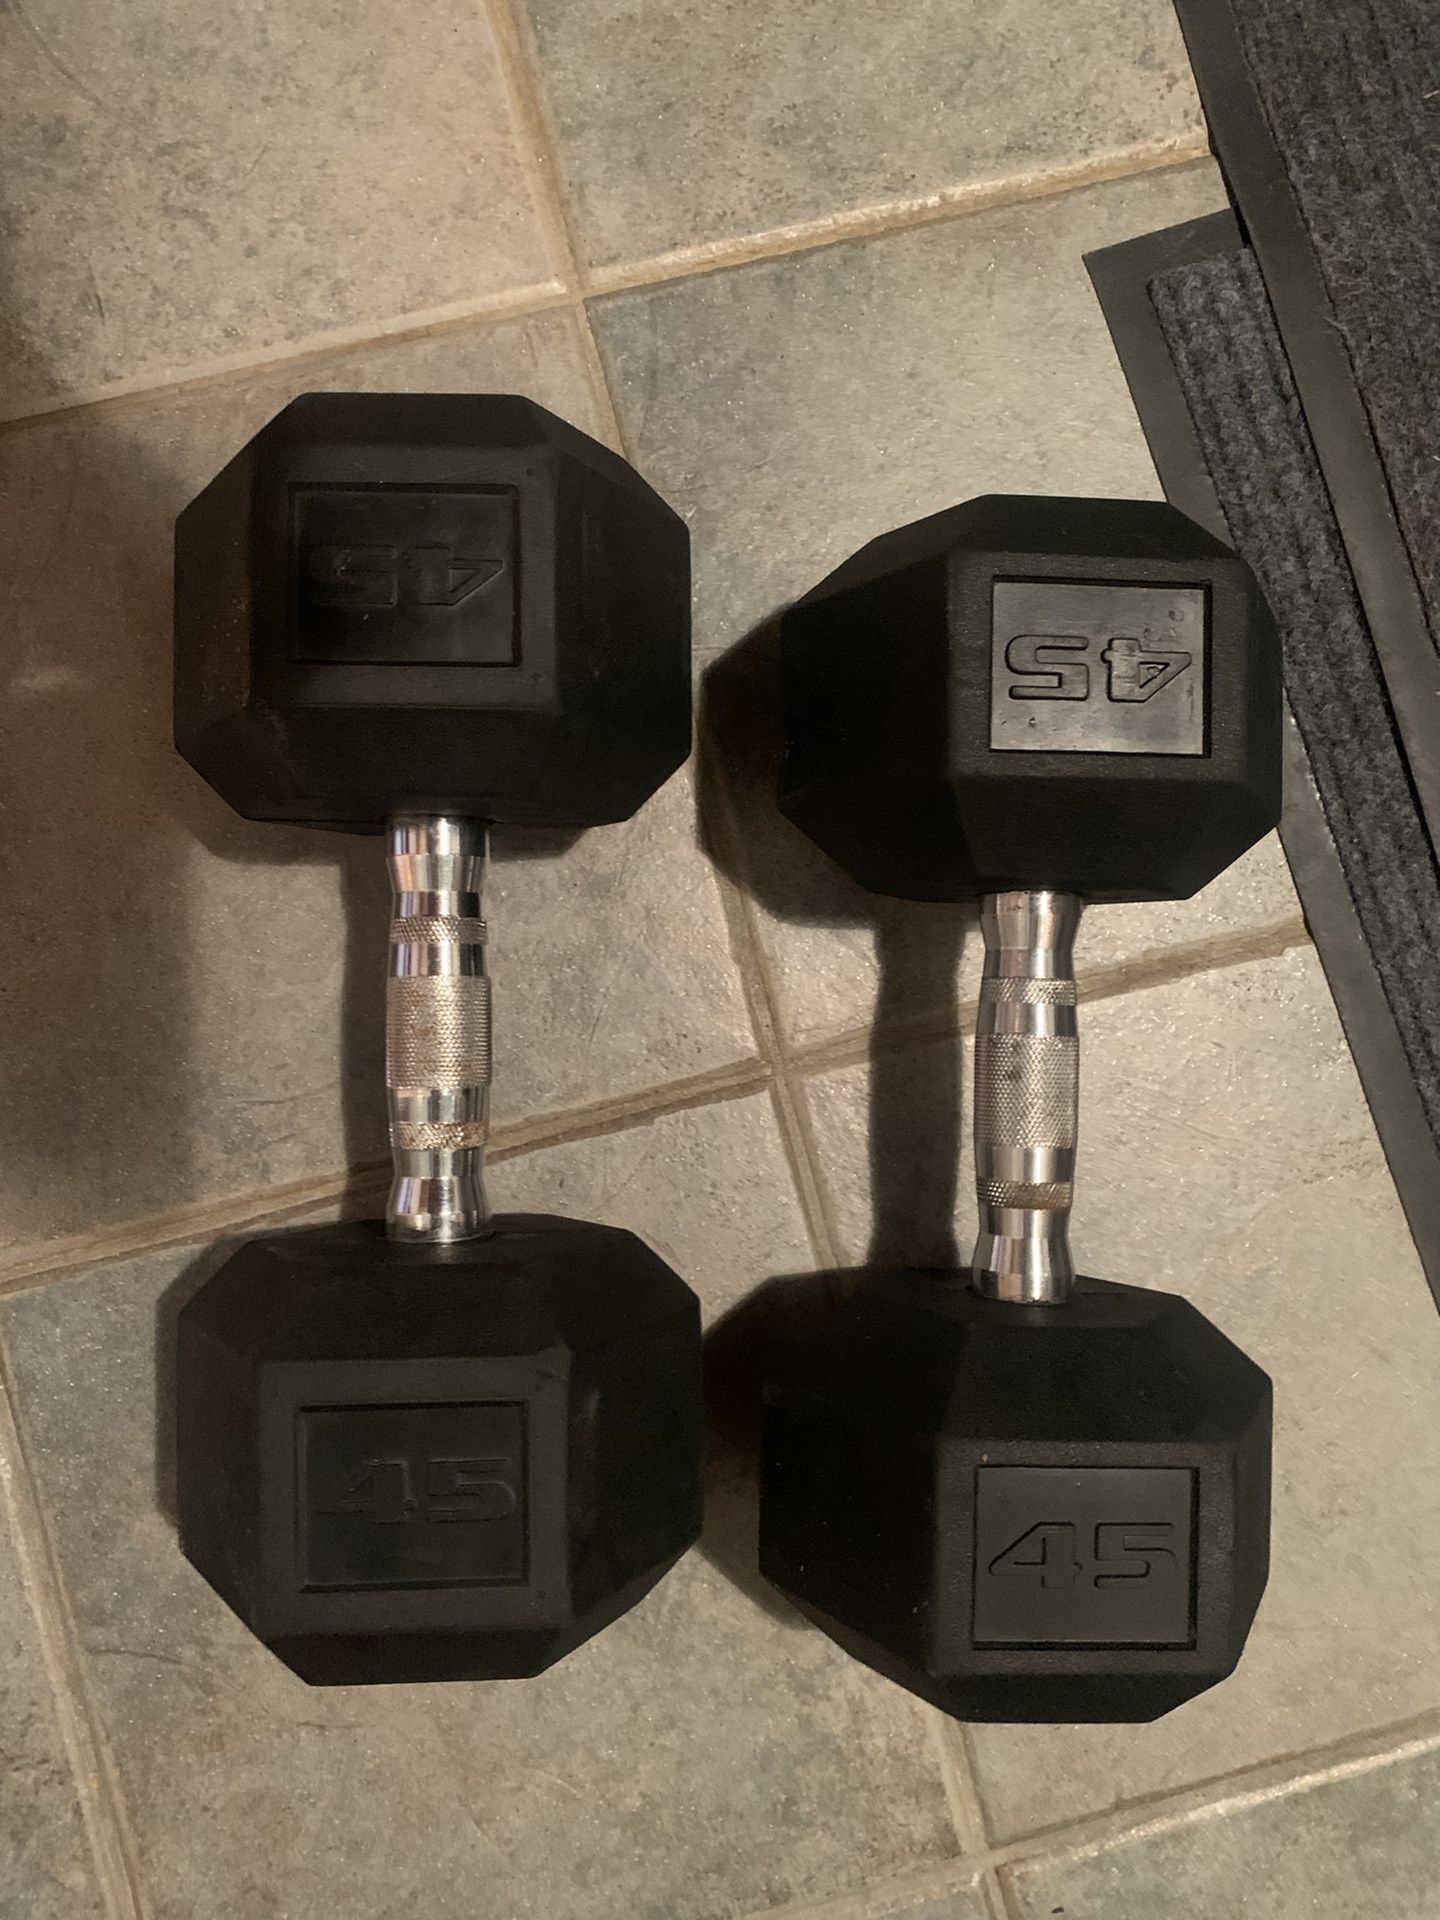 4 Pairs Of Rubber Coated Cast Iron Dumbbells